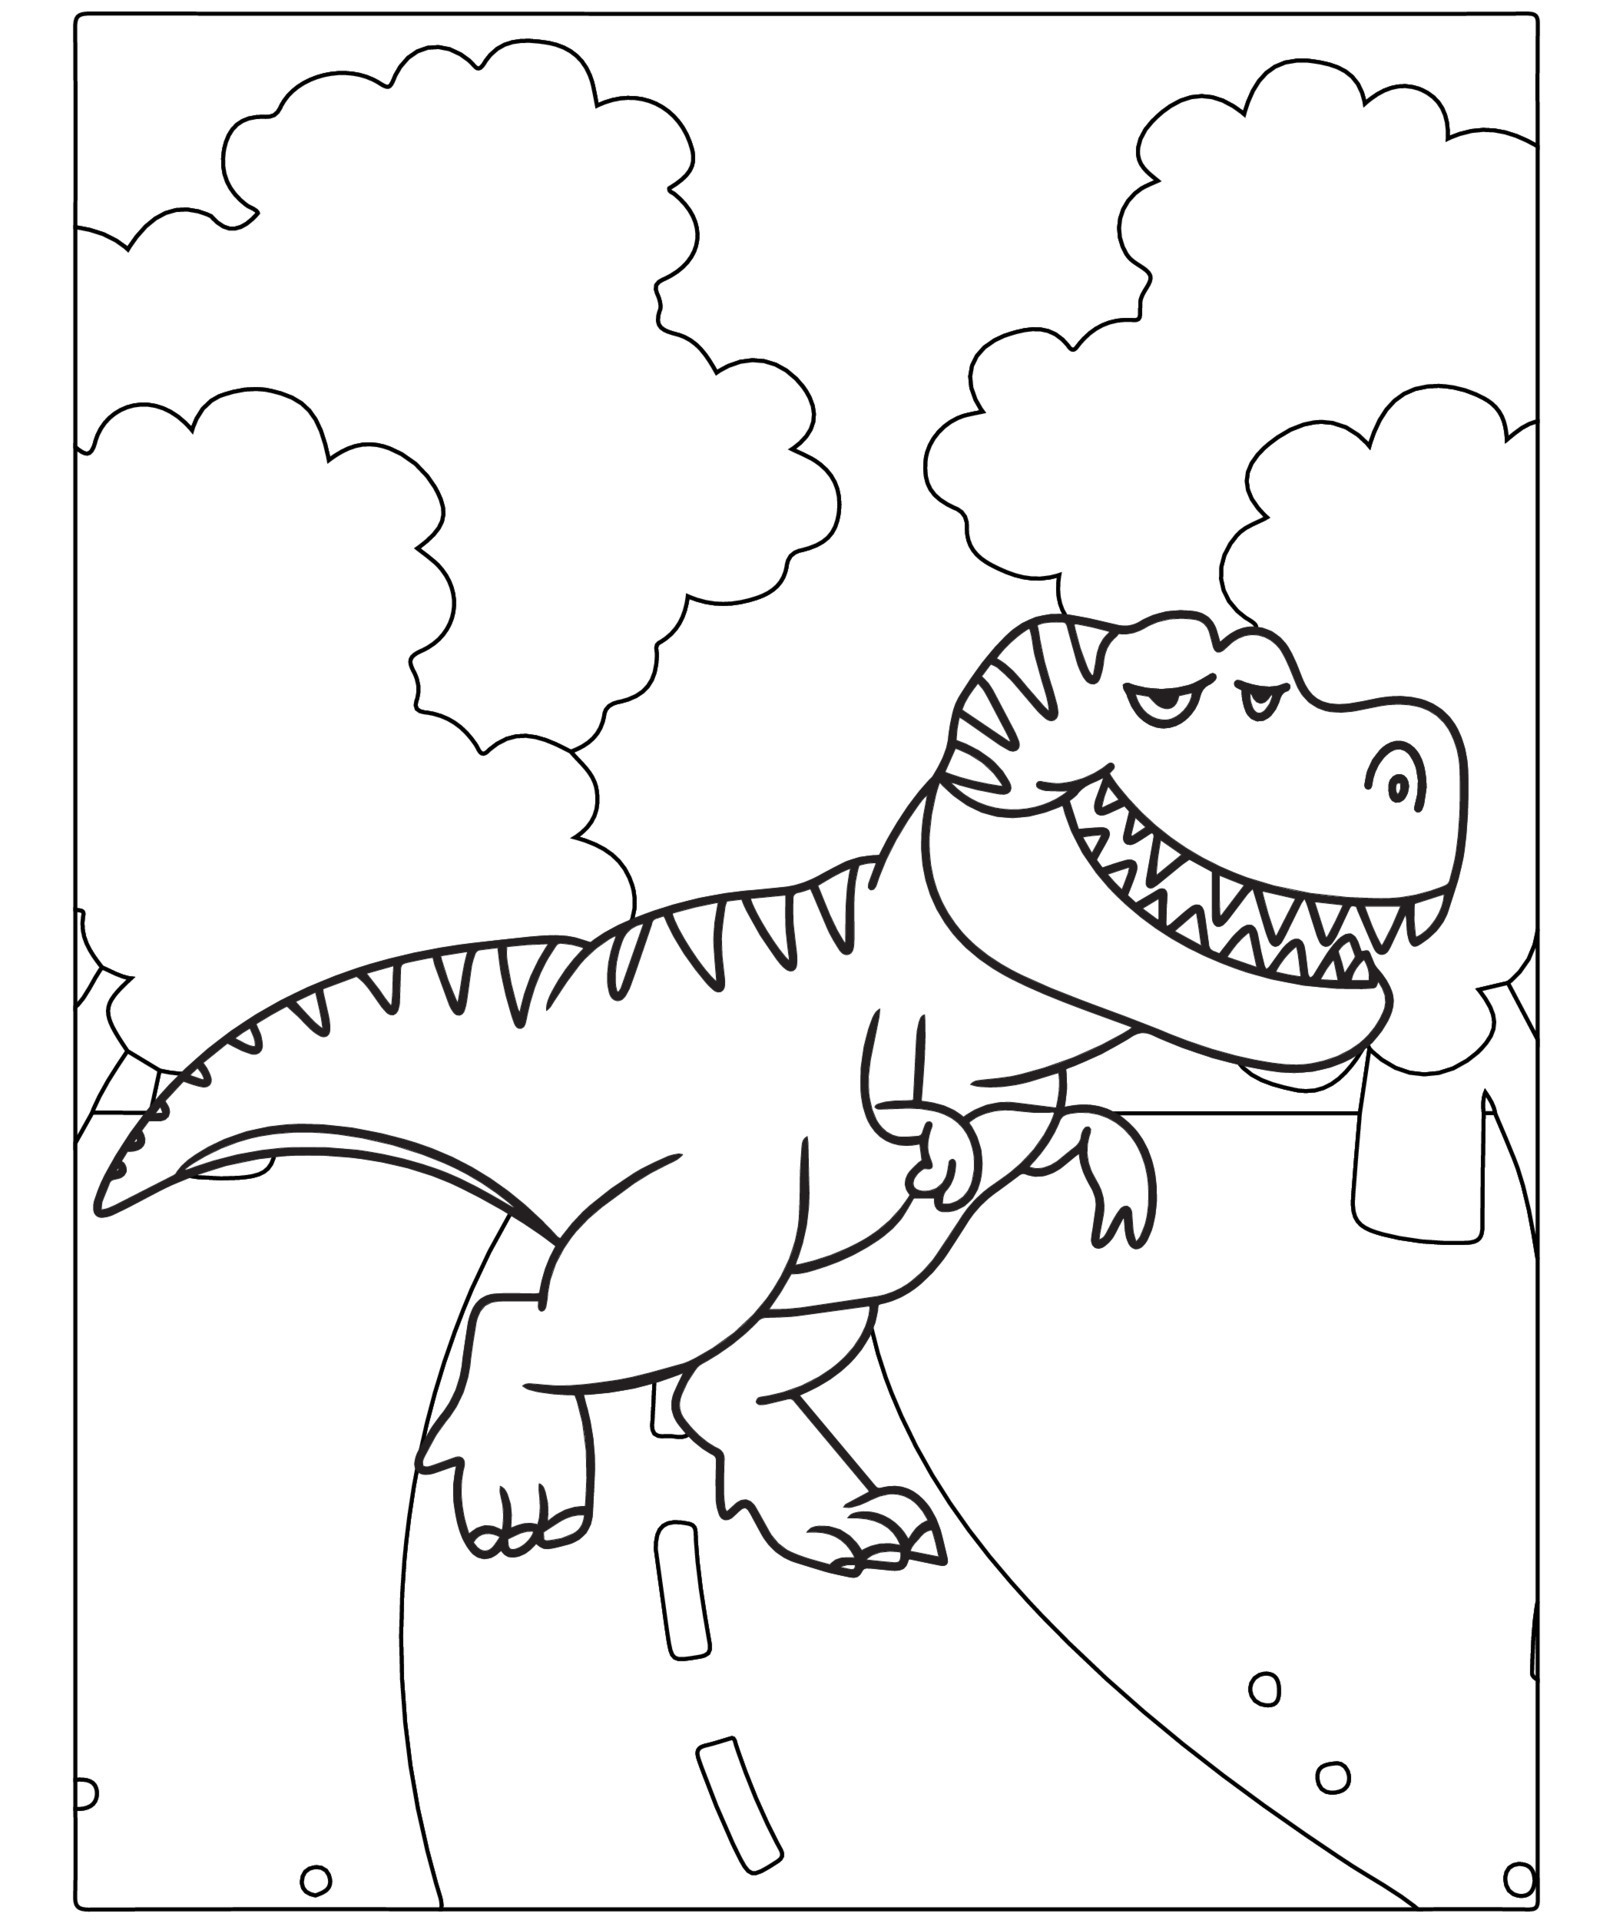 Beautiful Dinosaur Coloring Page For  in cartoon style  with Beautiful picture for coloring. Jurassic Park. Prehistoric landscape  printable. 9990822 Vector Art at Vecteezy